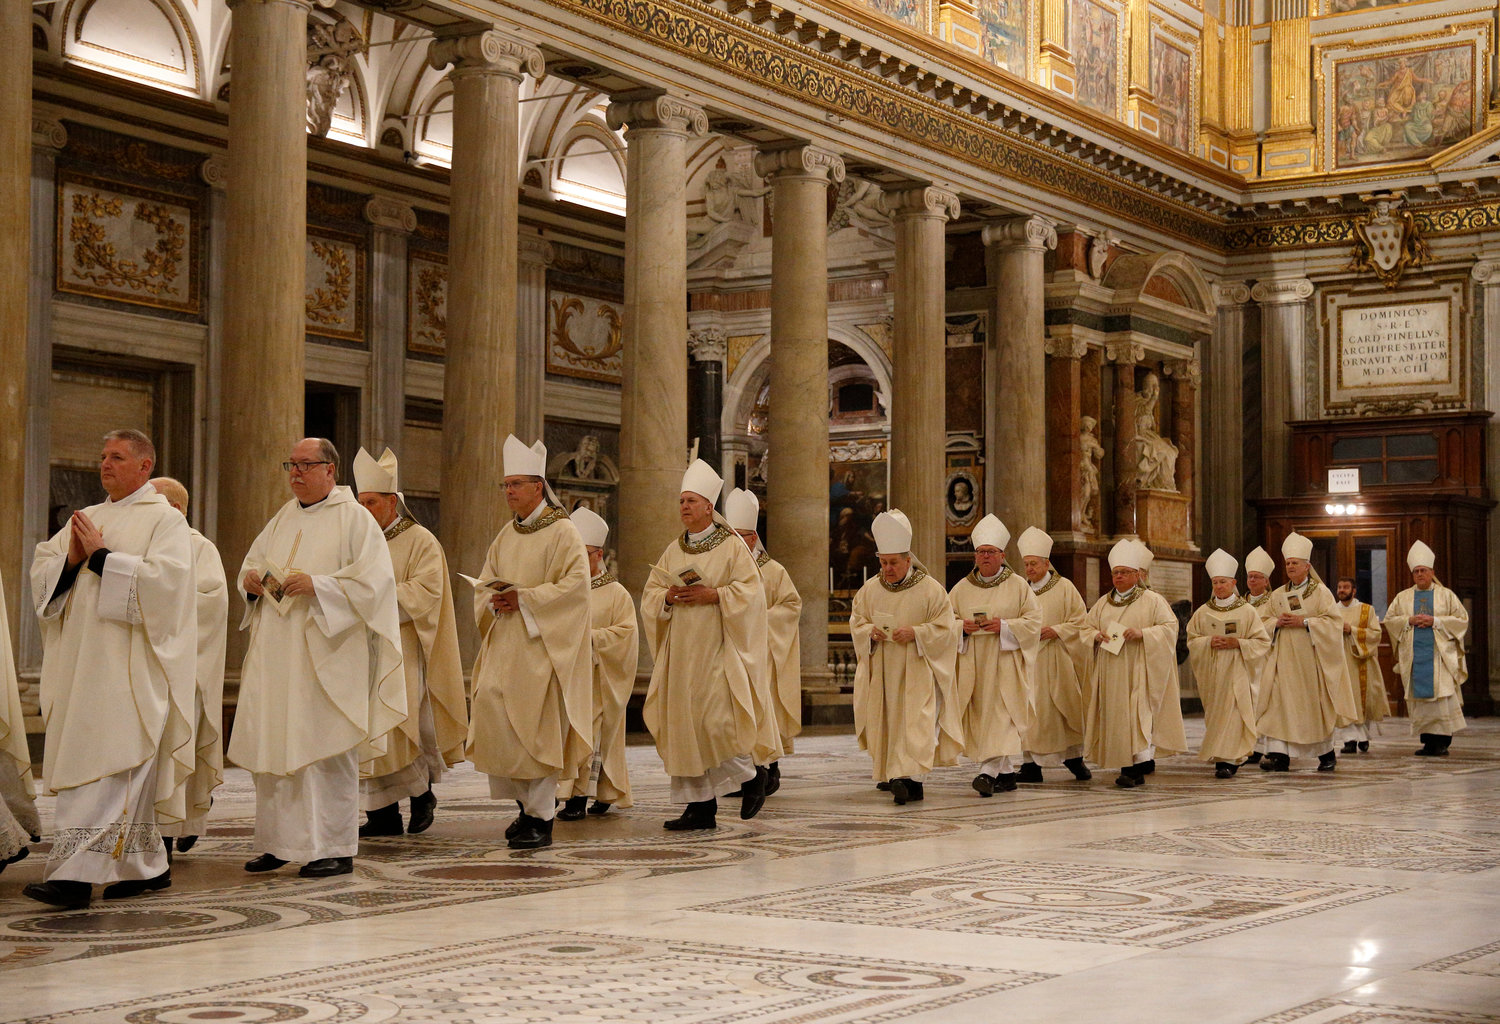 U.S. bishops from Iowa, Kansas, Missouri and Nebraska arrive in procession to concelebrate Mass at the Basilica of St. Mary Major in Rome Jan. 14, 2020. The bishops were making their "ad limina" visits to the Vatican to report on the status of their dioceses to the pope and Vatican officials.